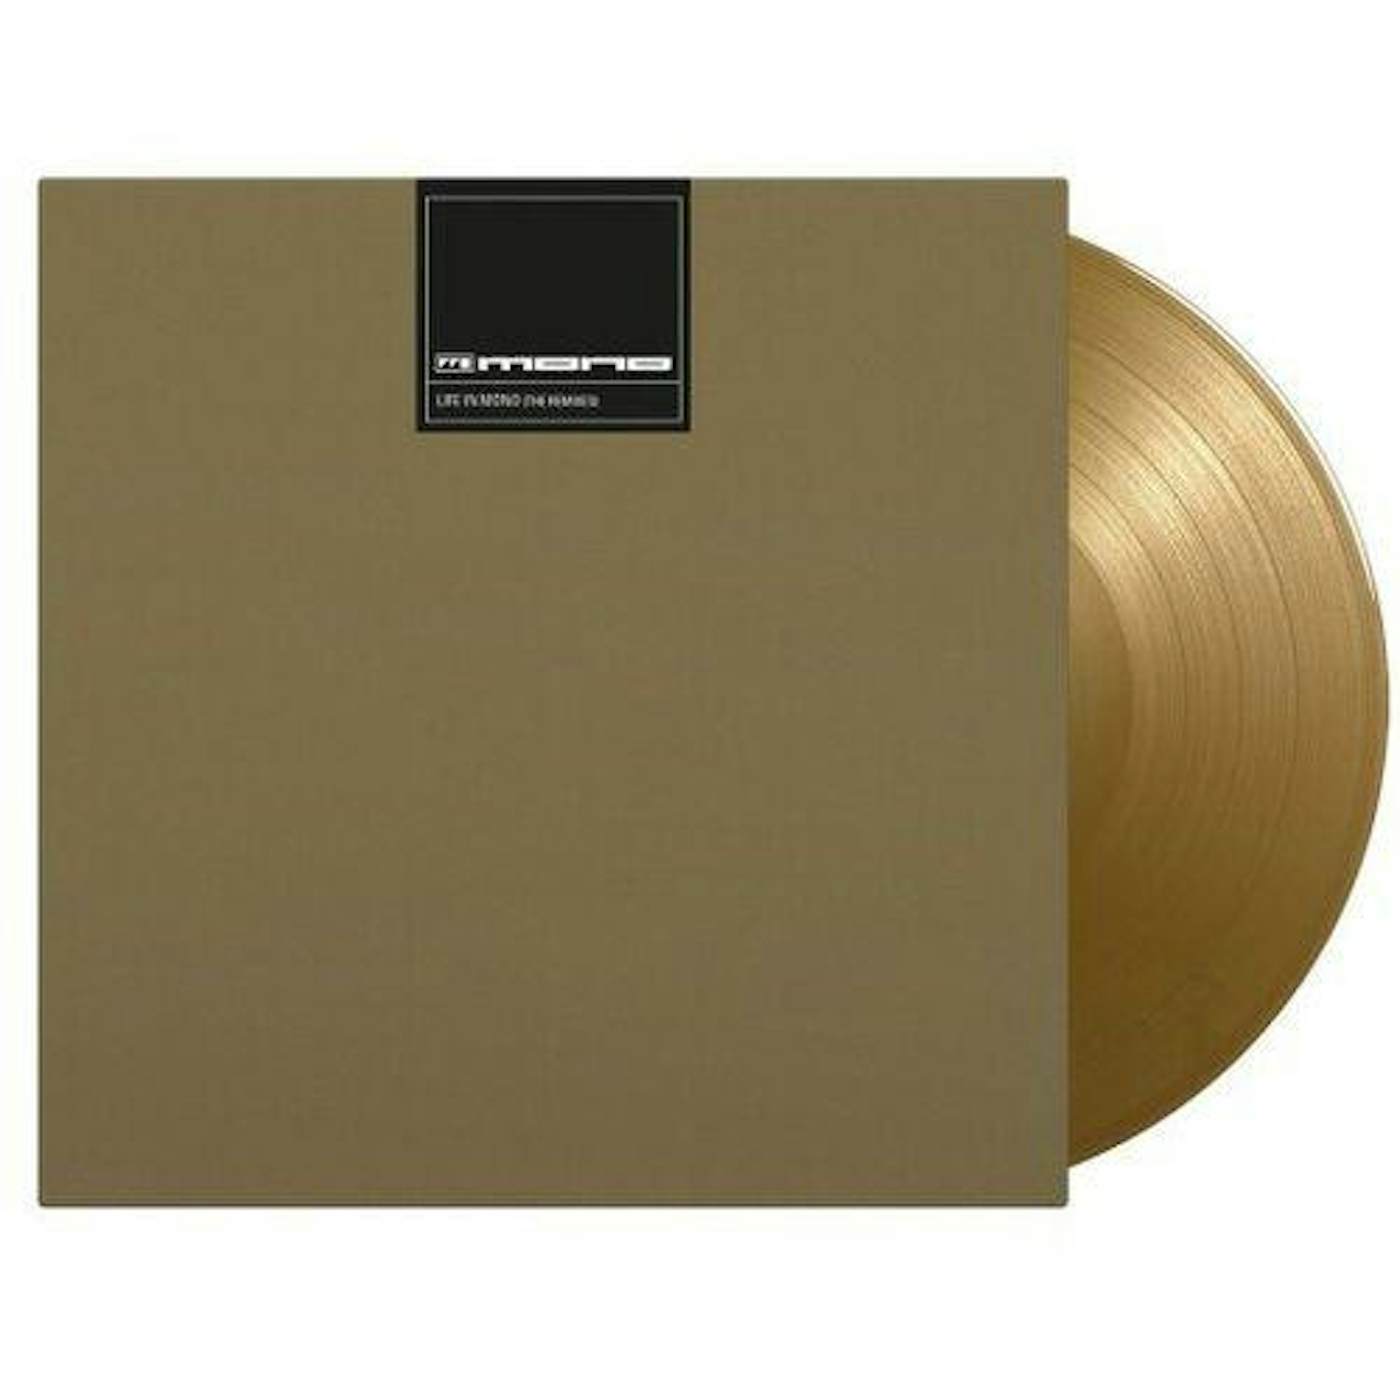 Life In Mono: The Remixes (Limited/180g/Gold) Vinyl Record